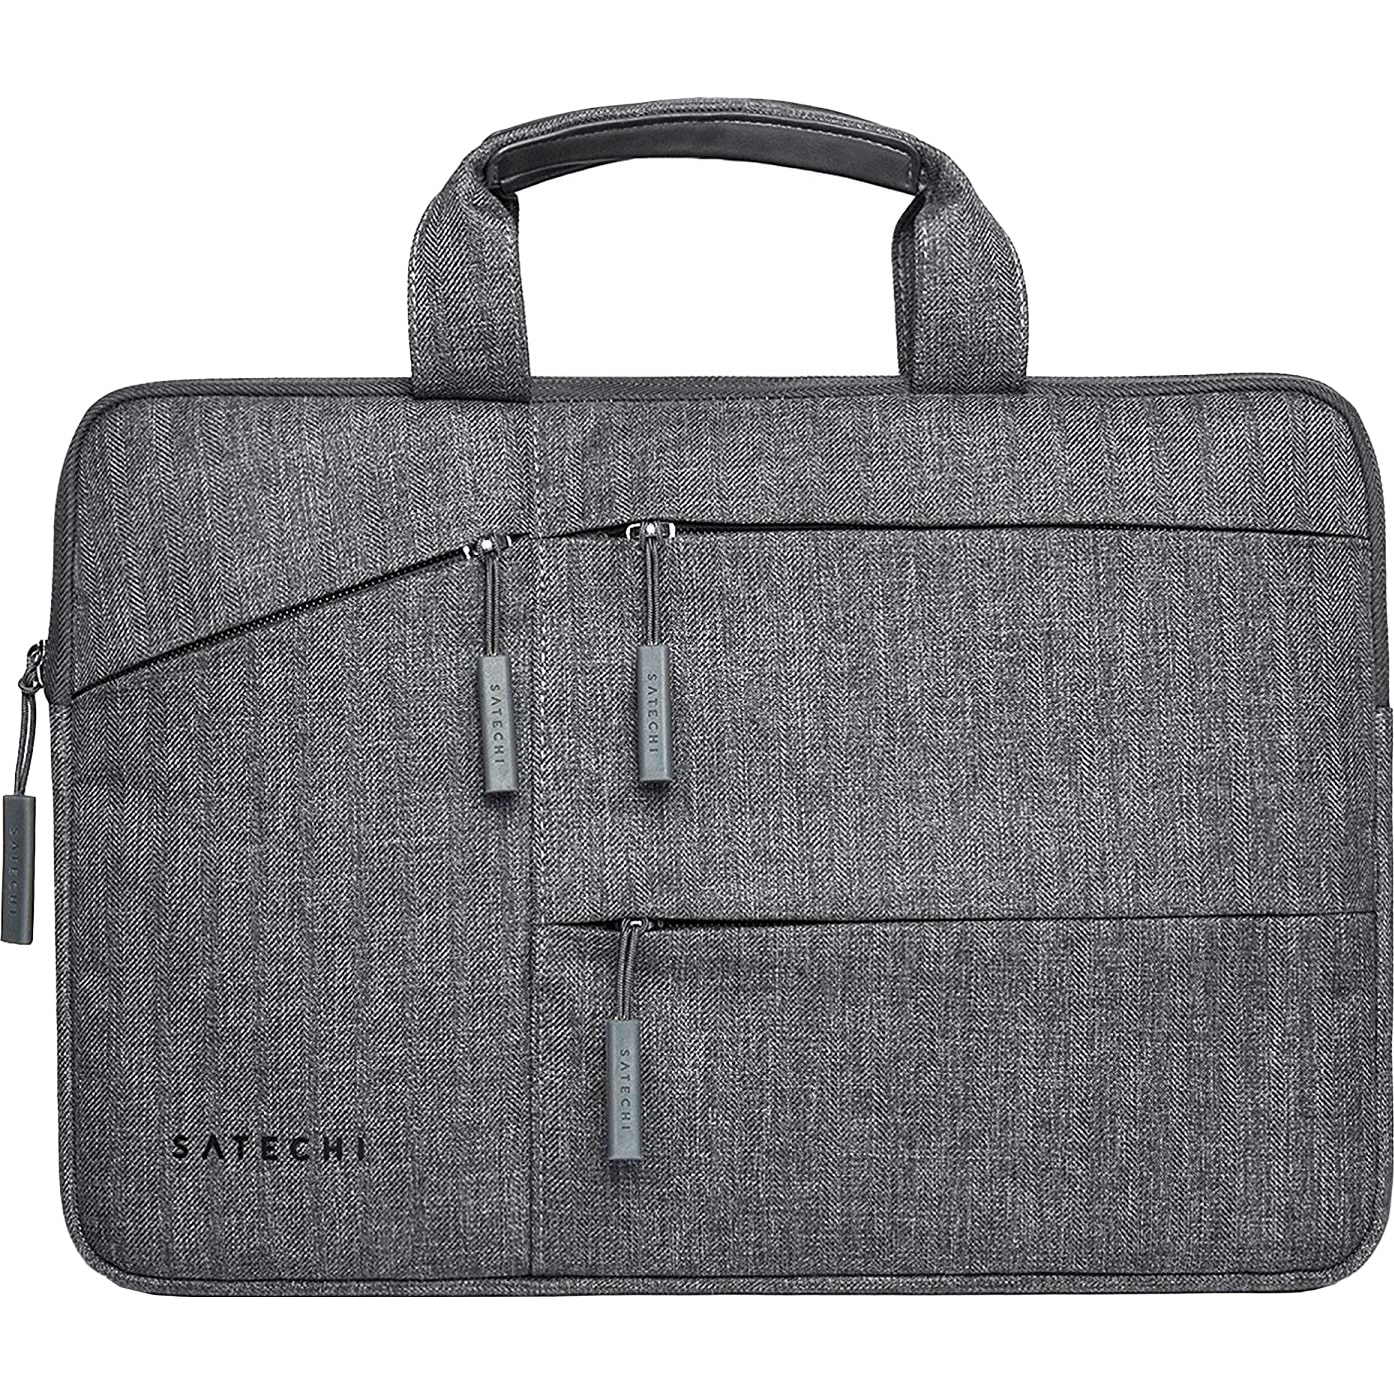 цена Сумка Satechi Water-Resistant Laptop Carrying Case ST-LTB13